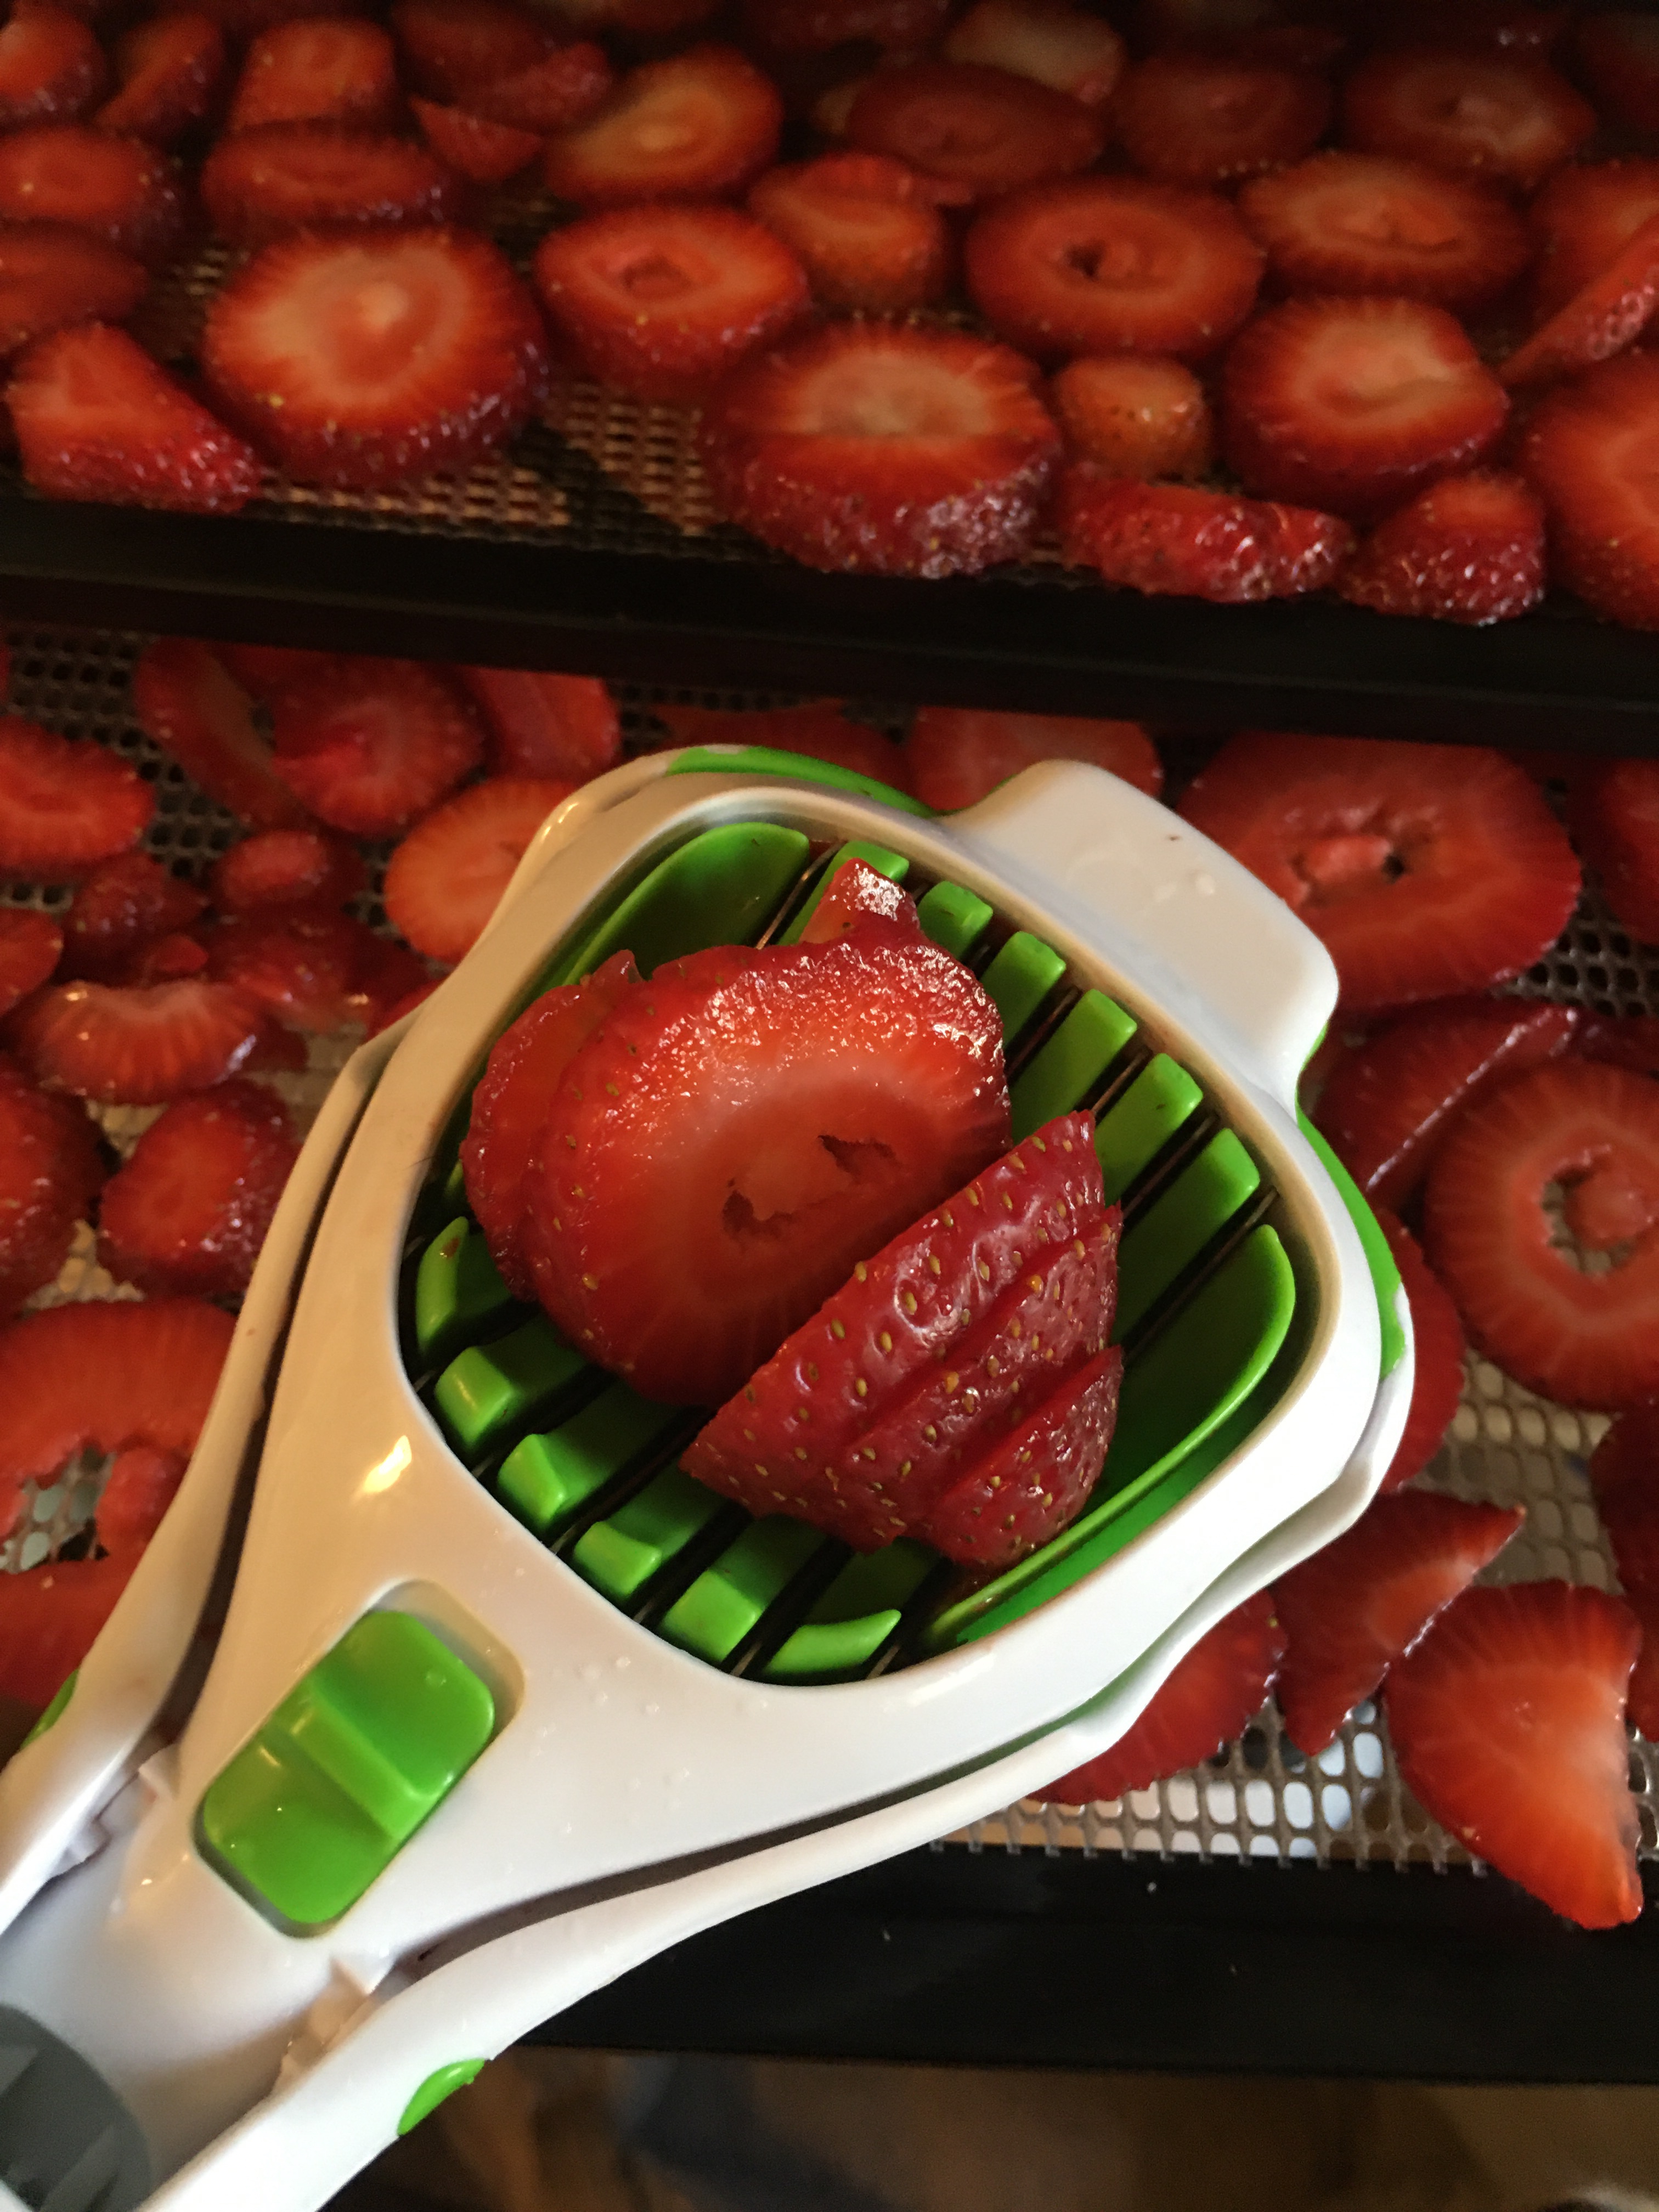 A perfectly sliced strawberry using an egg slicer